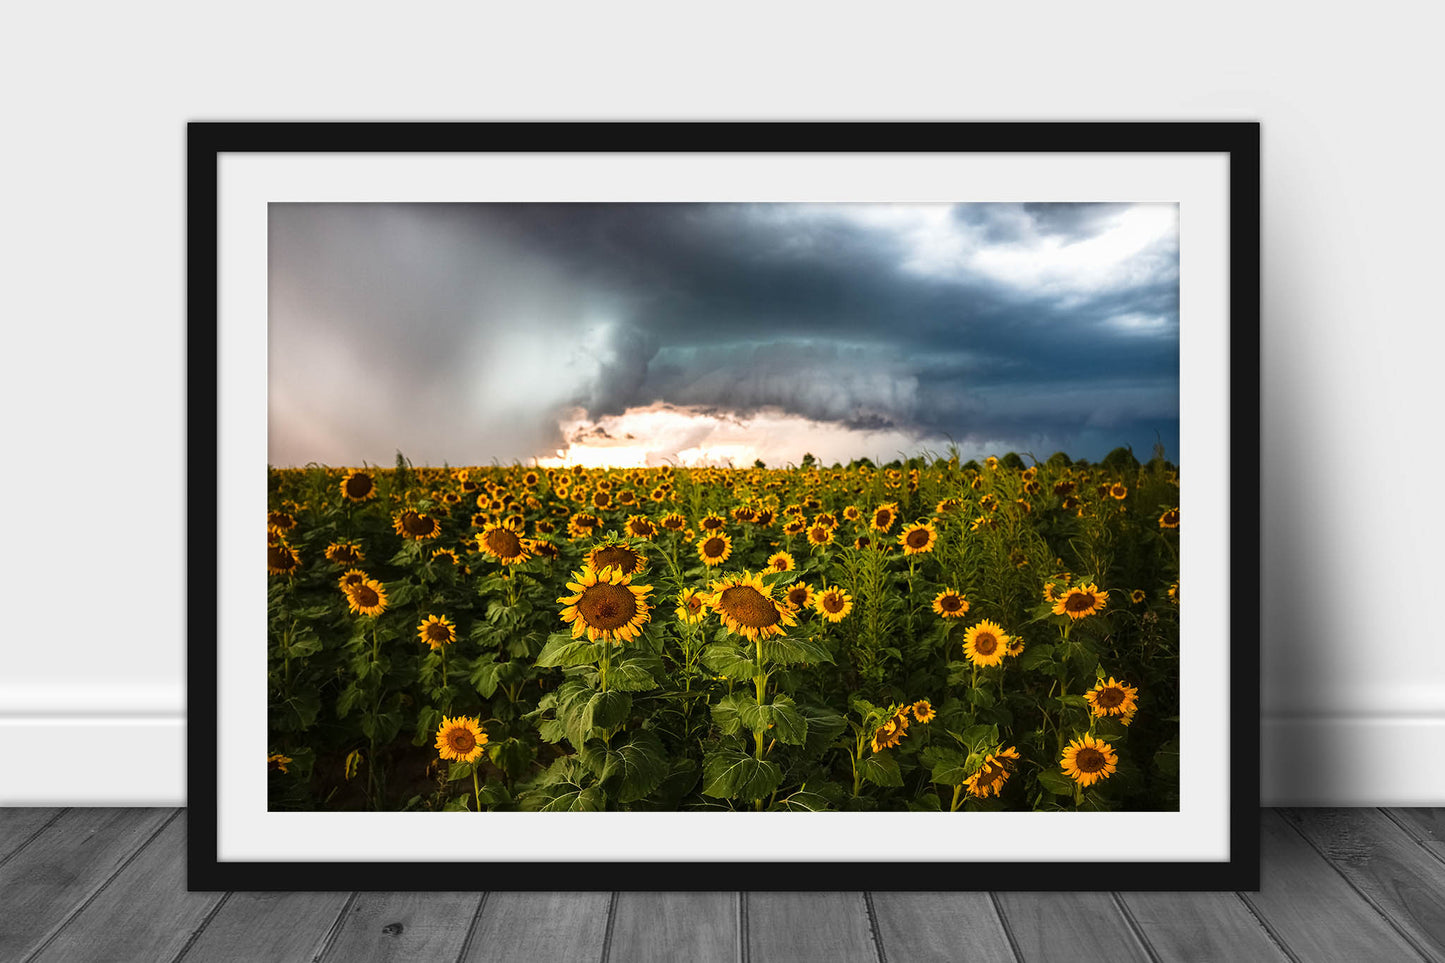 Framed and matted country photography print of an intense storm over a sunflower field on a stormy late summer day in Kansas by Sean Ramsey of Southern Plains Photography.